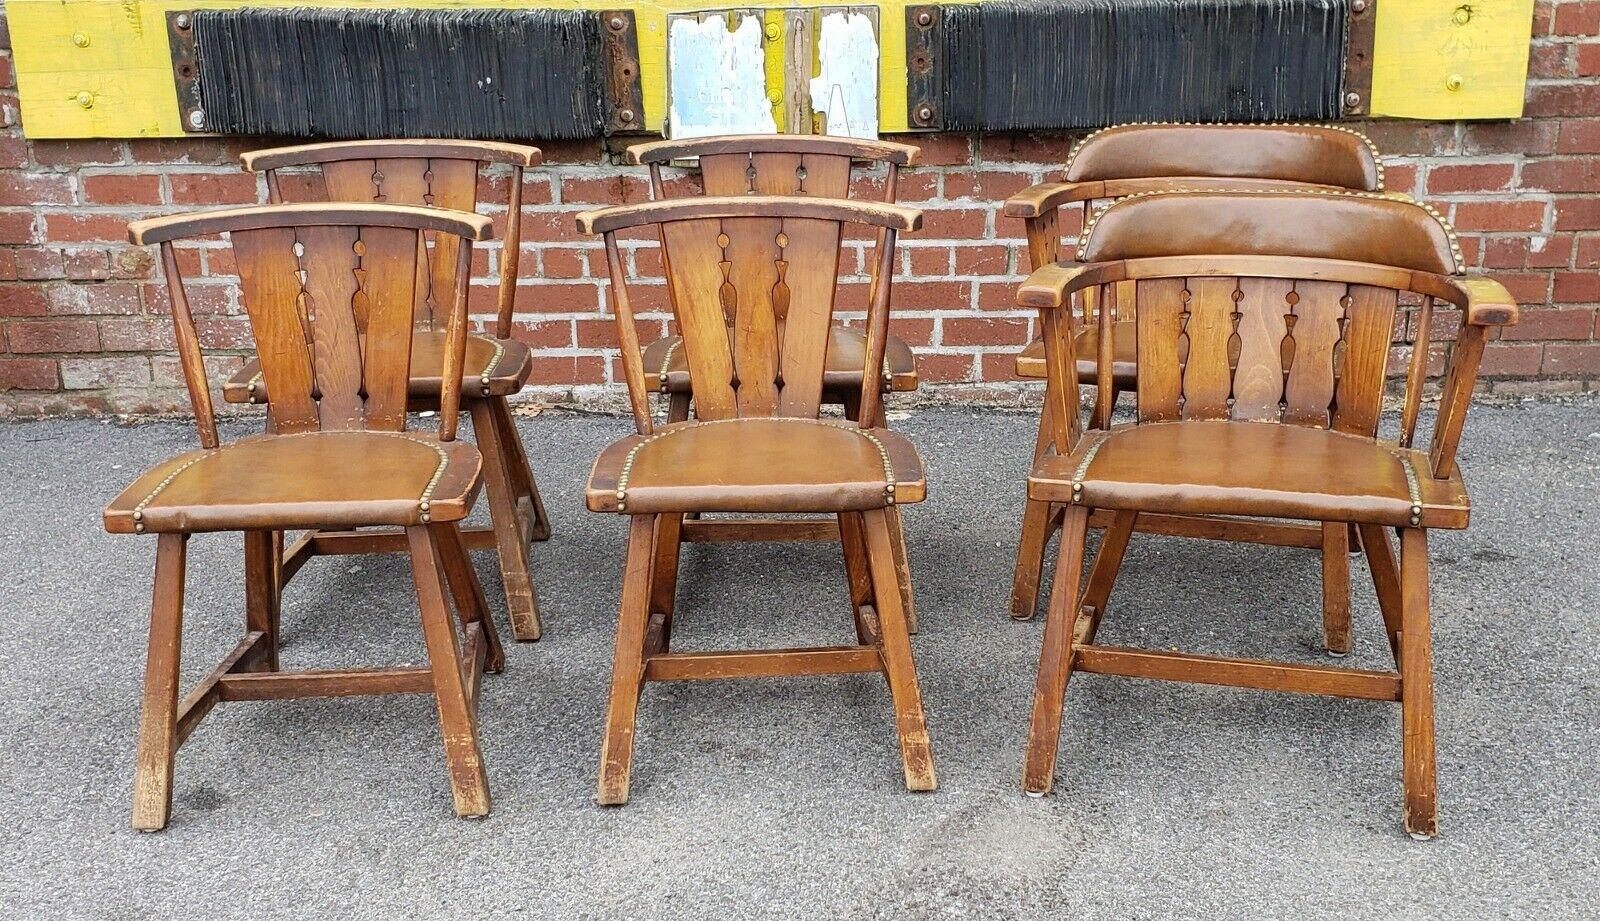 Chatsworth Antiques & Consignment - Furniture Consignment in